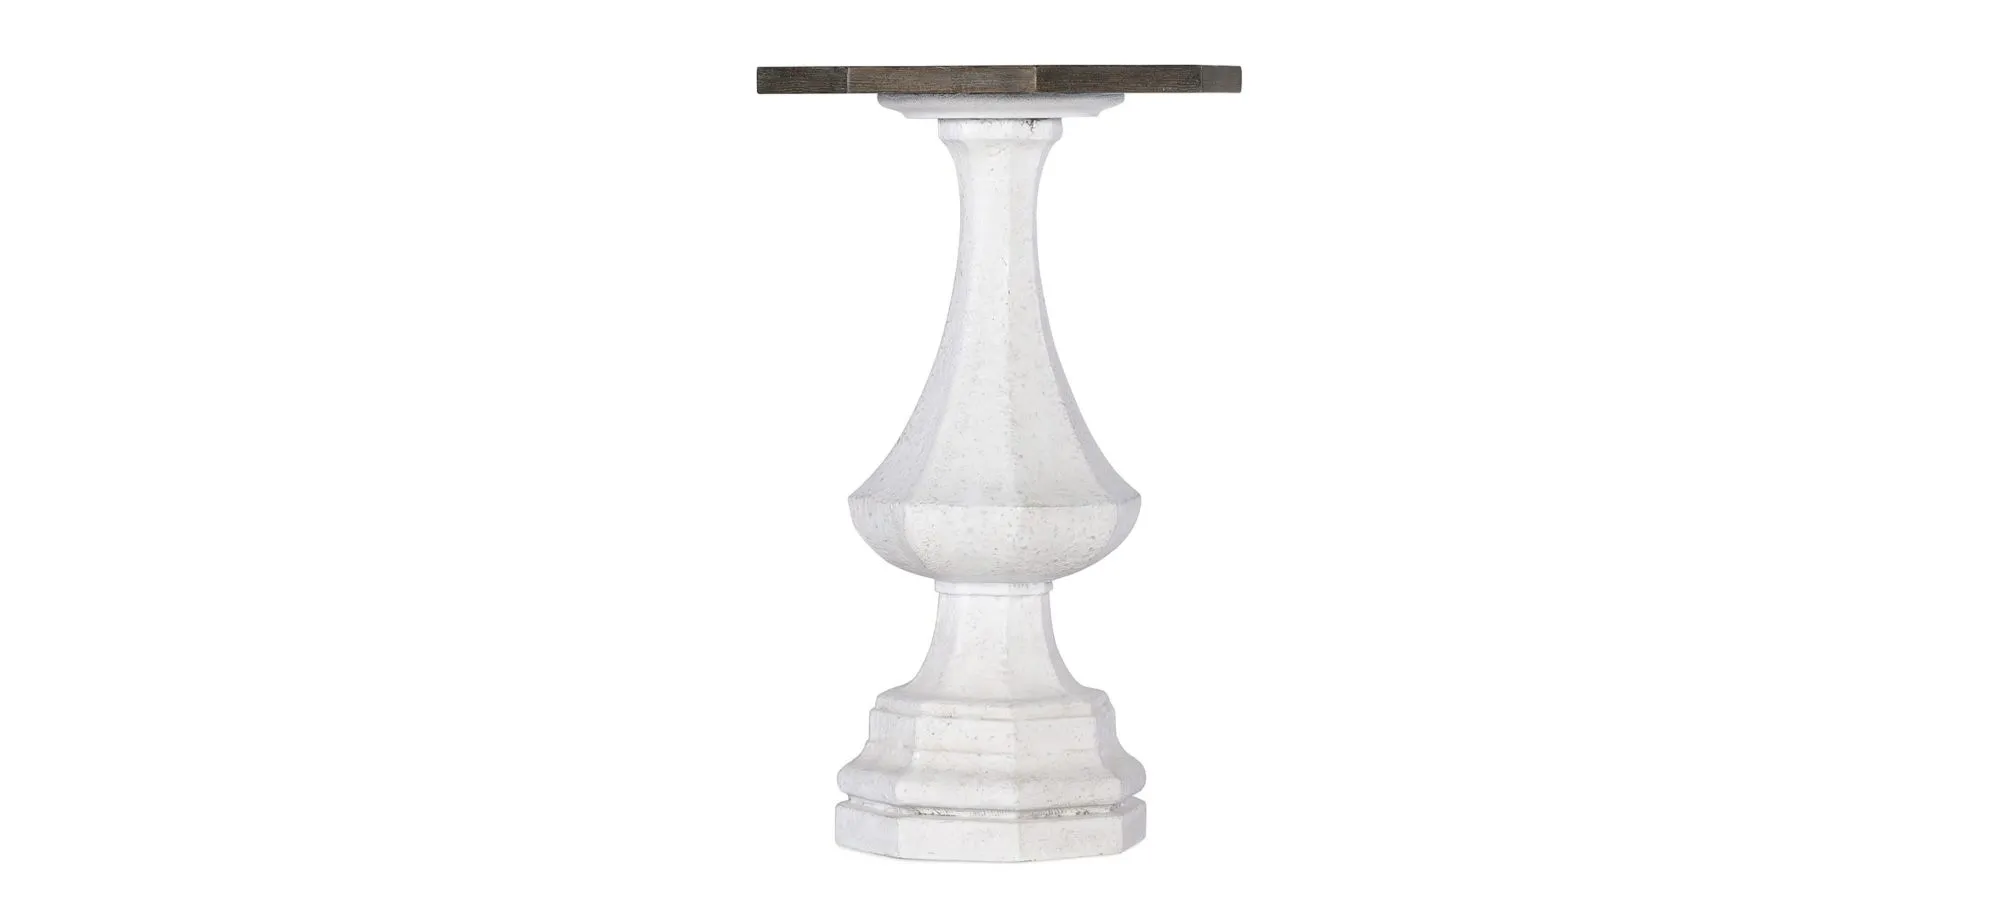 Traditions Drink Table in Magnolia: a soft white finish on the base with Maduro, a rich brown with grey undertones on the top by Hooker Furniture